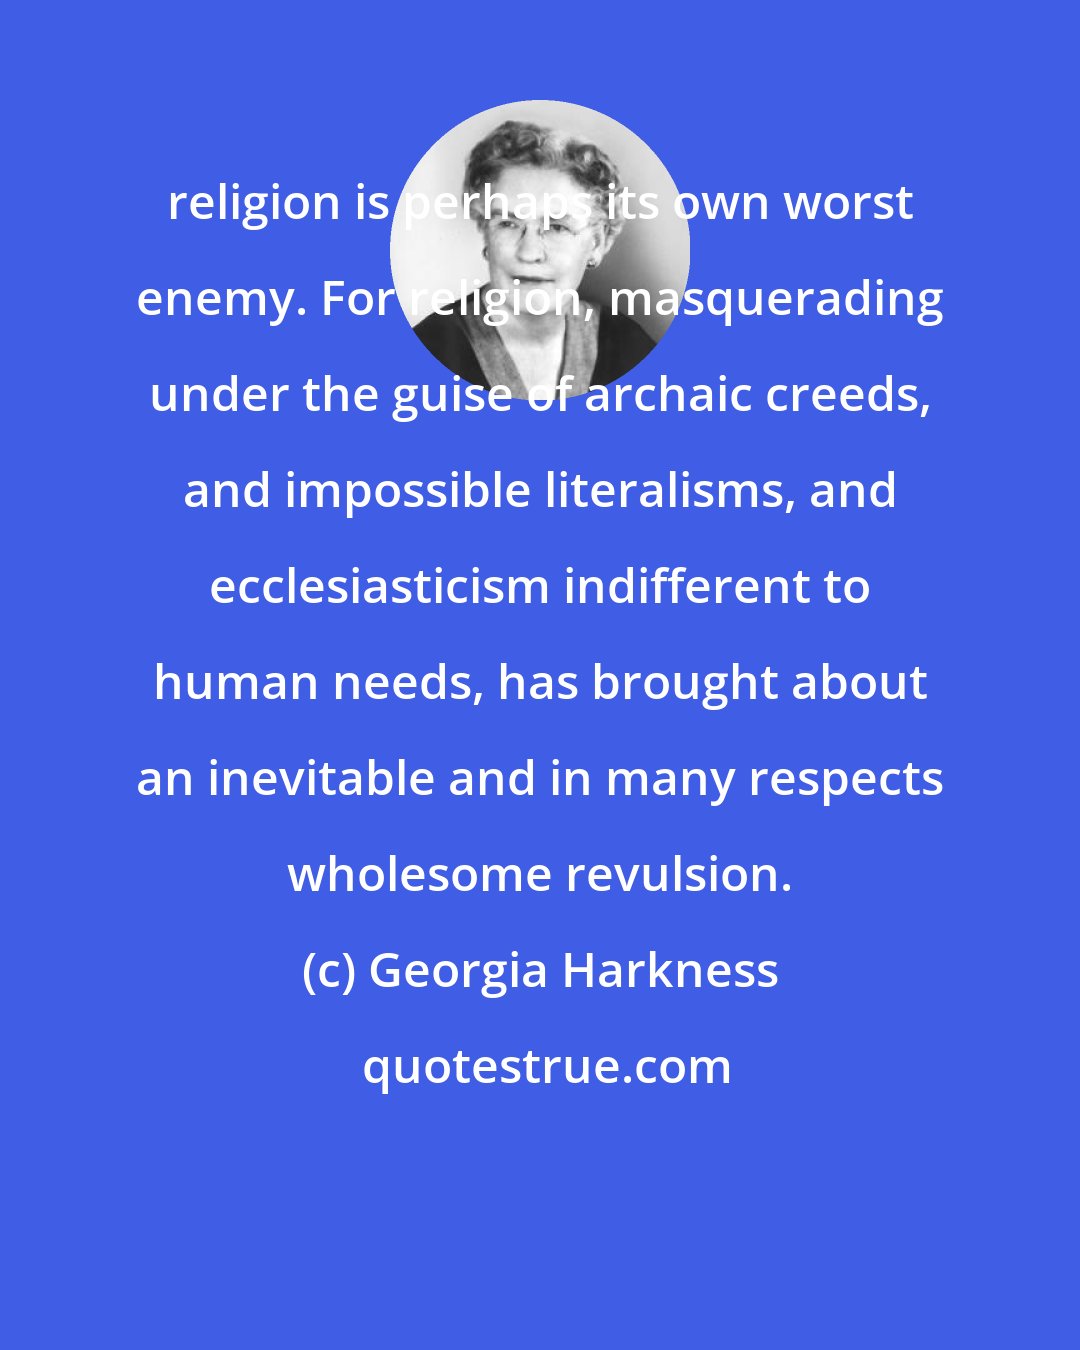 Georgia Harkness: religion is perhaps its own worst enemy. For religion, masquerading under the guise of archaic creeds, and impossible literalisms, and ecclesiasticism indifferent to human needs, has brought about an inevitable and in many respects wholesome revulsion.